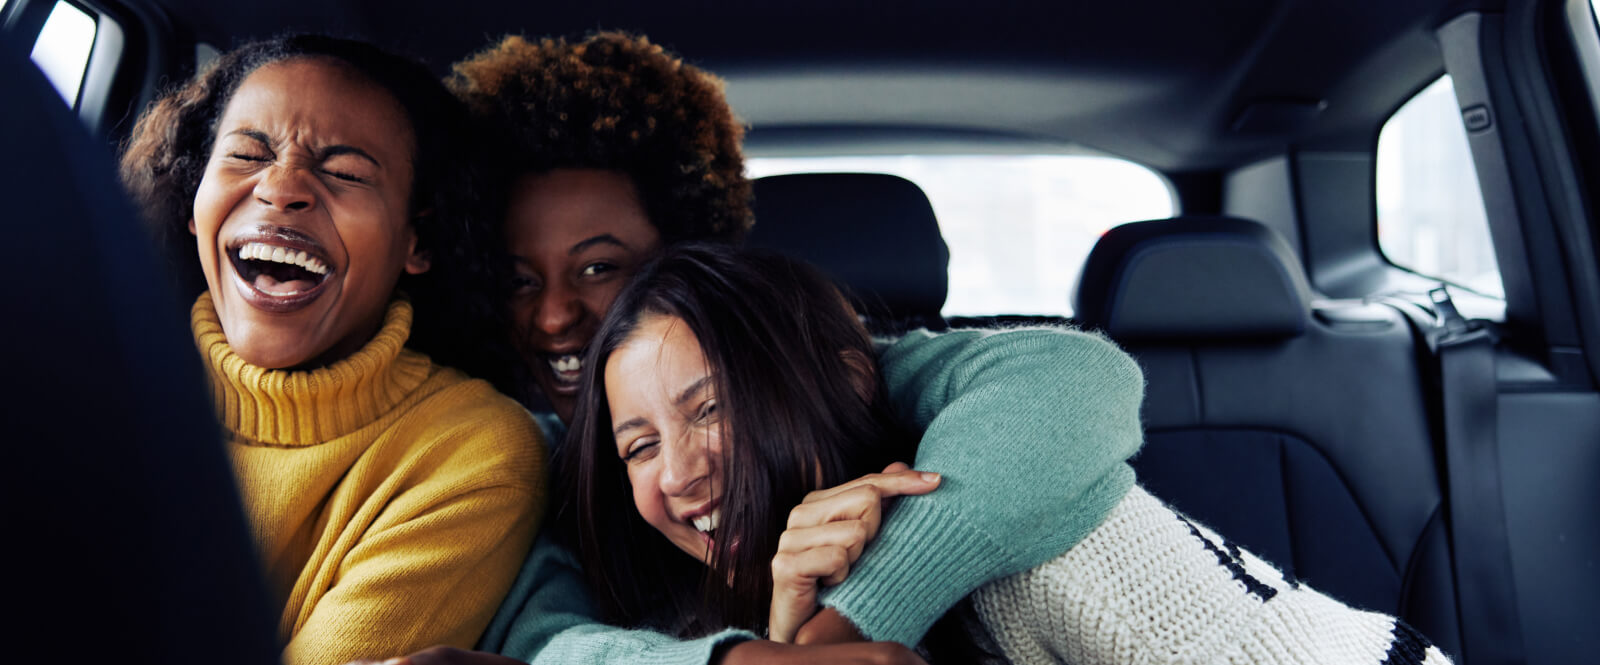 Three women in the back of a car laughing and hugging